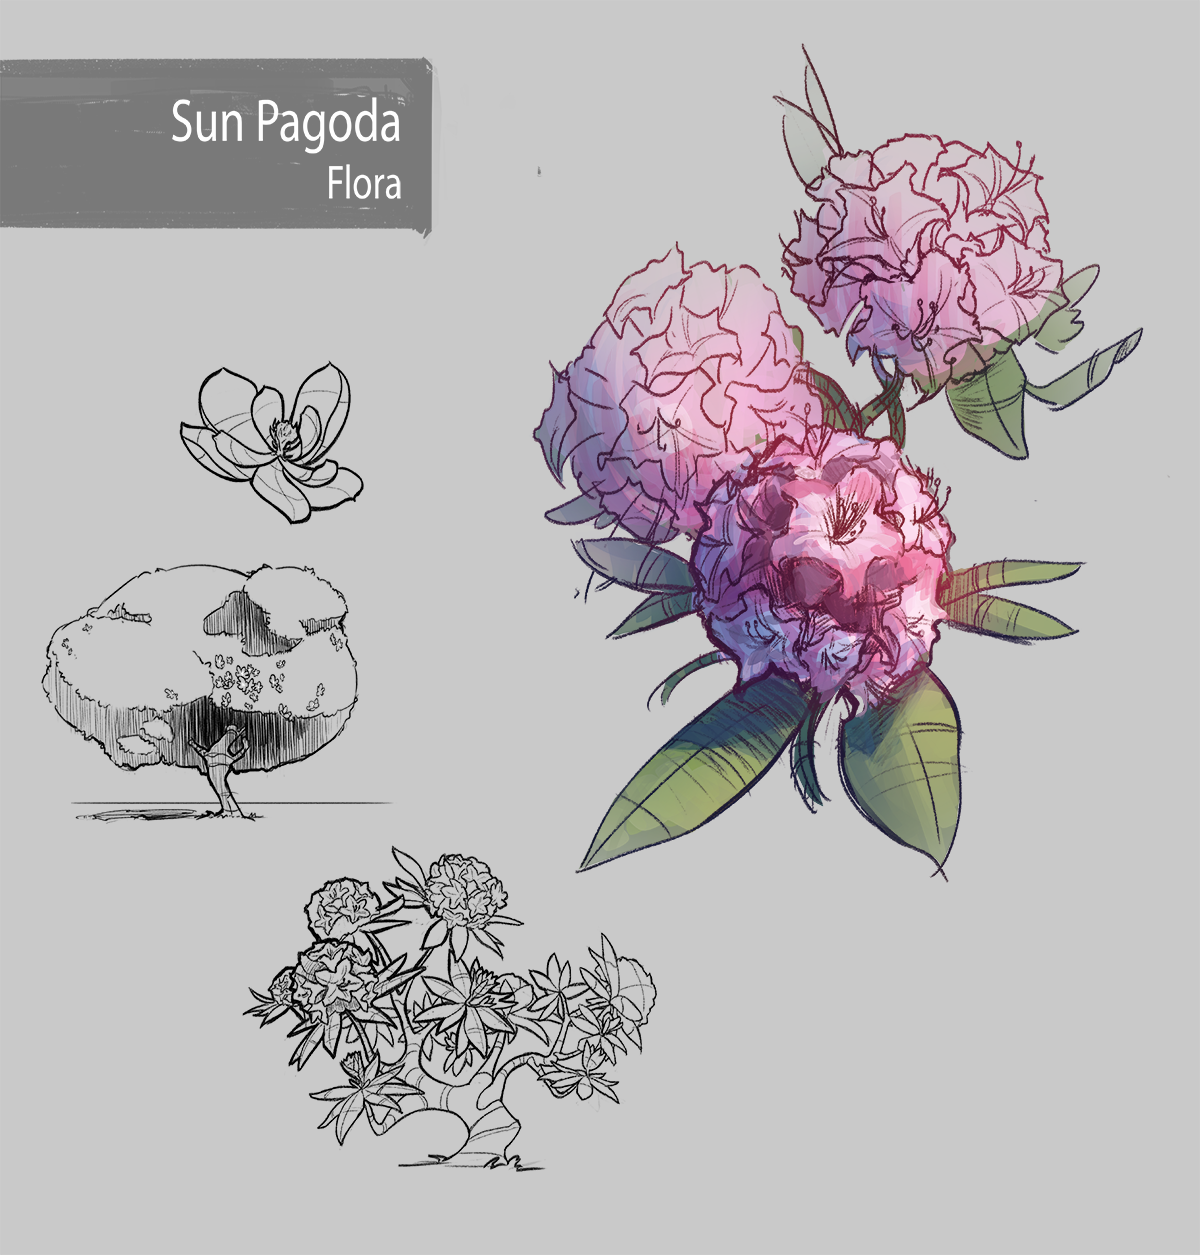 Sketches of rhododendrons, a magnolia tree, and a magnolia flower